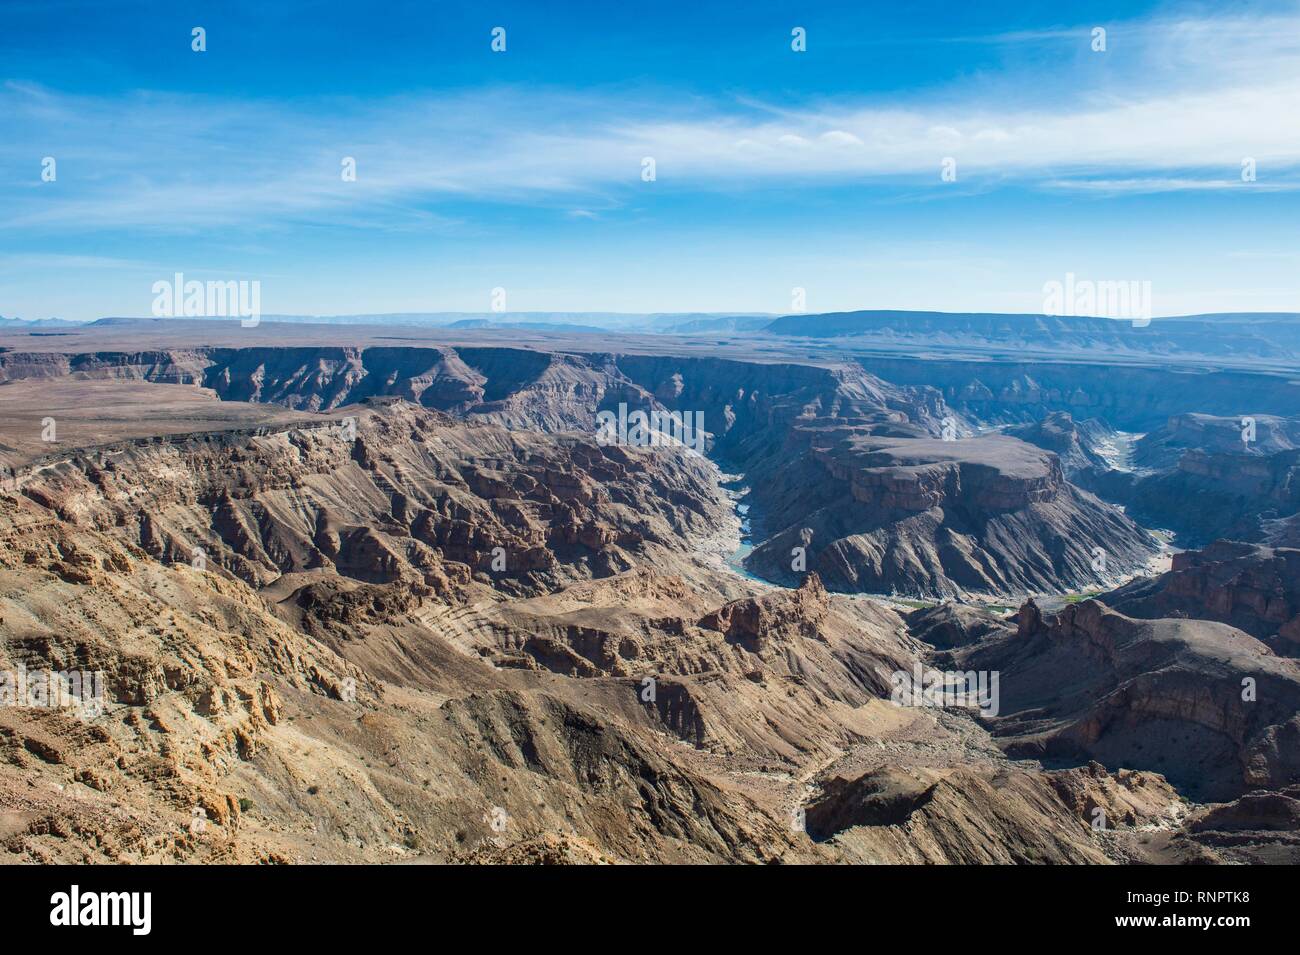 Overlook over the Fish River Canyon, Namibia Stock Photo